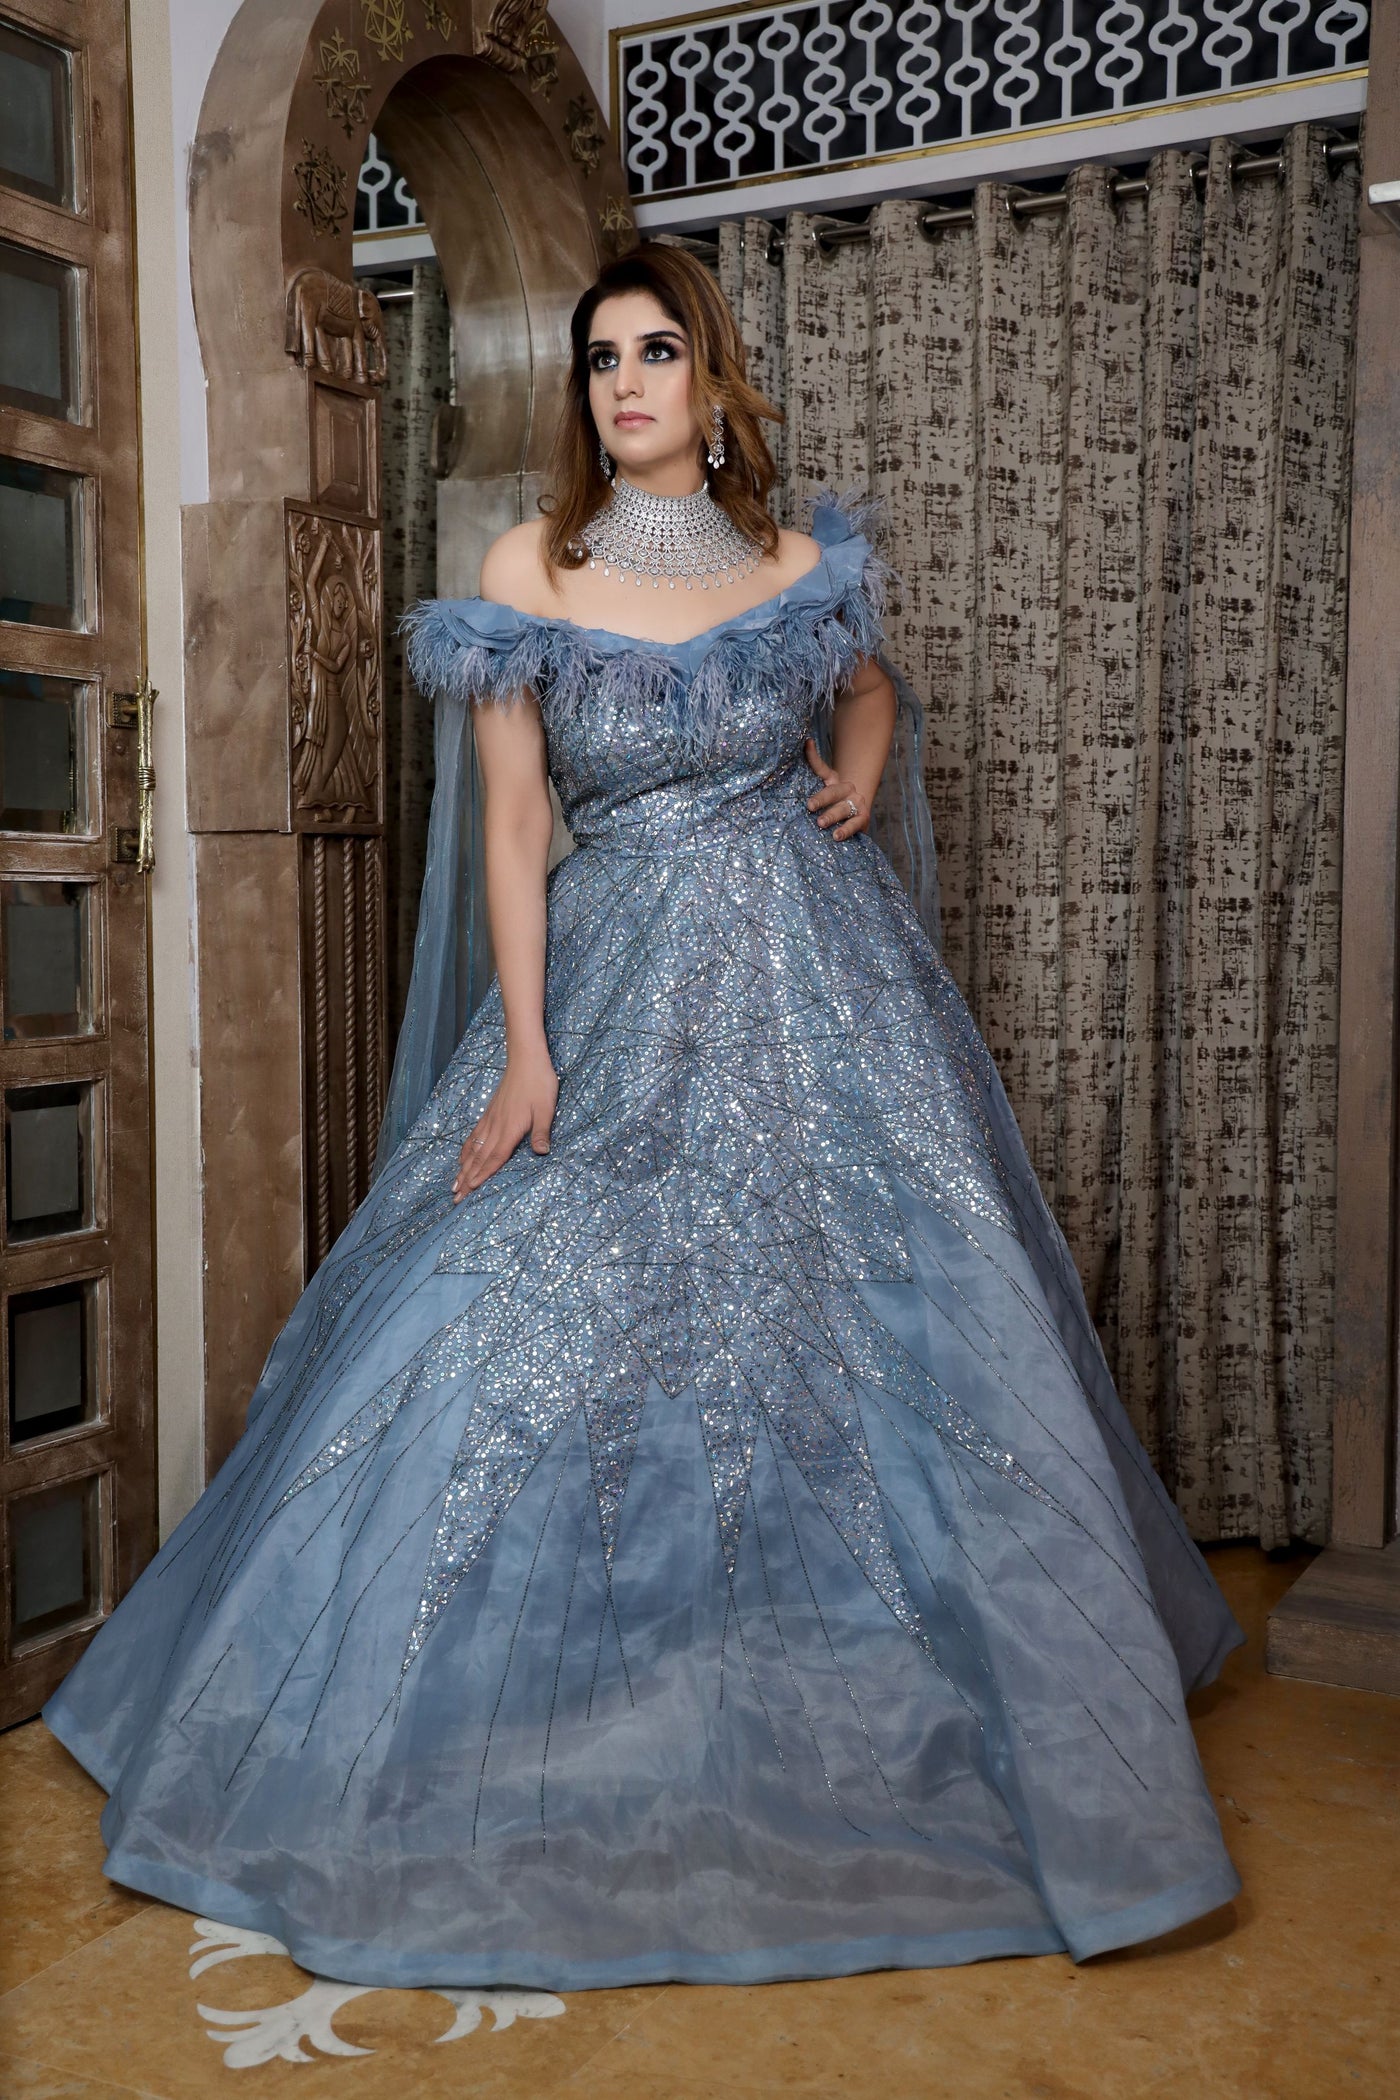 beautiful blue color geomatical motif gown